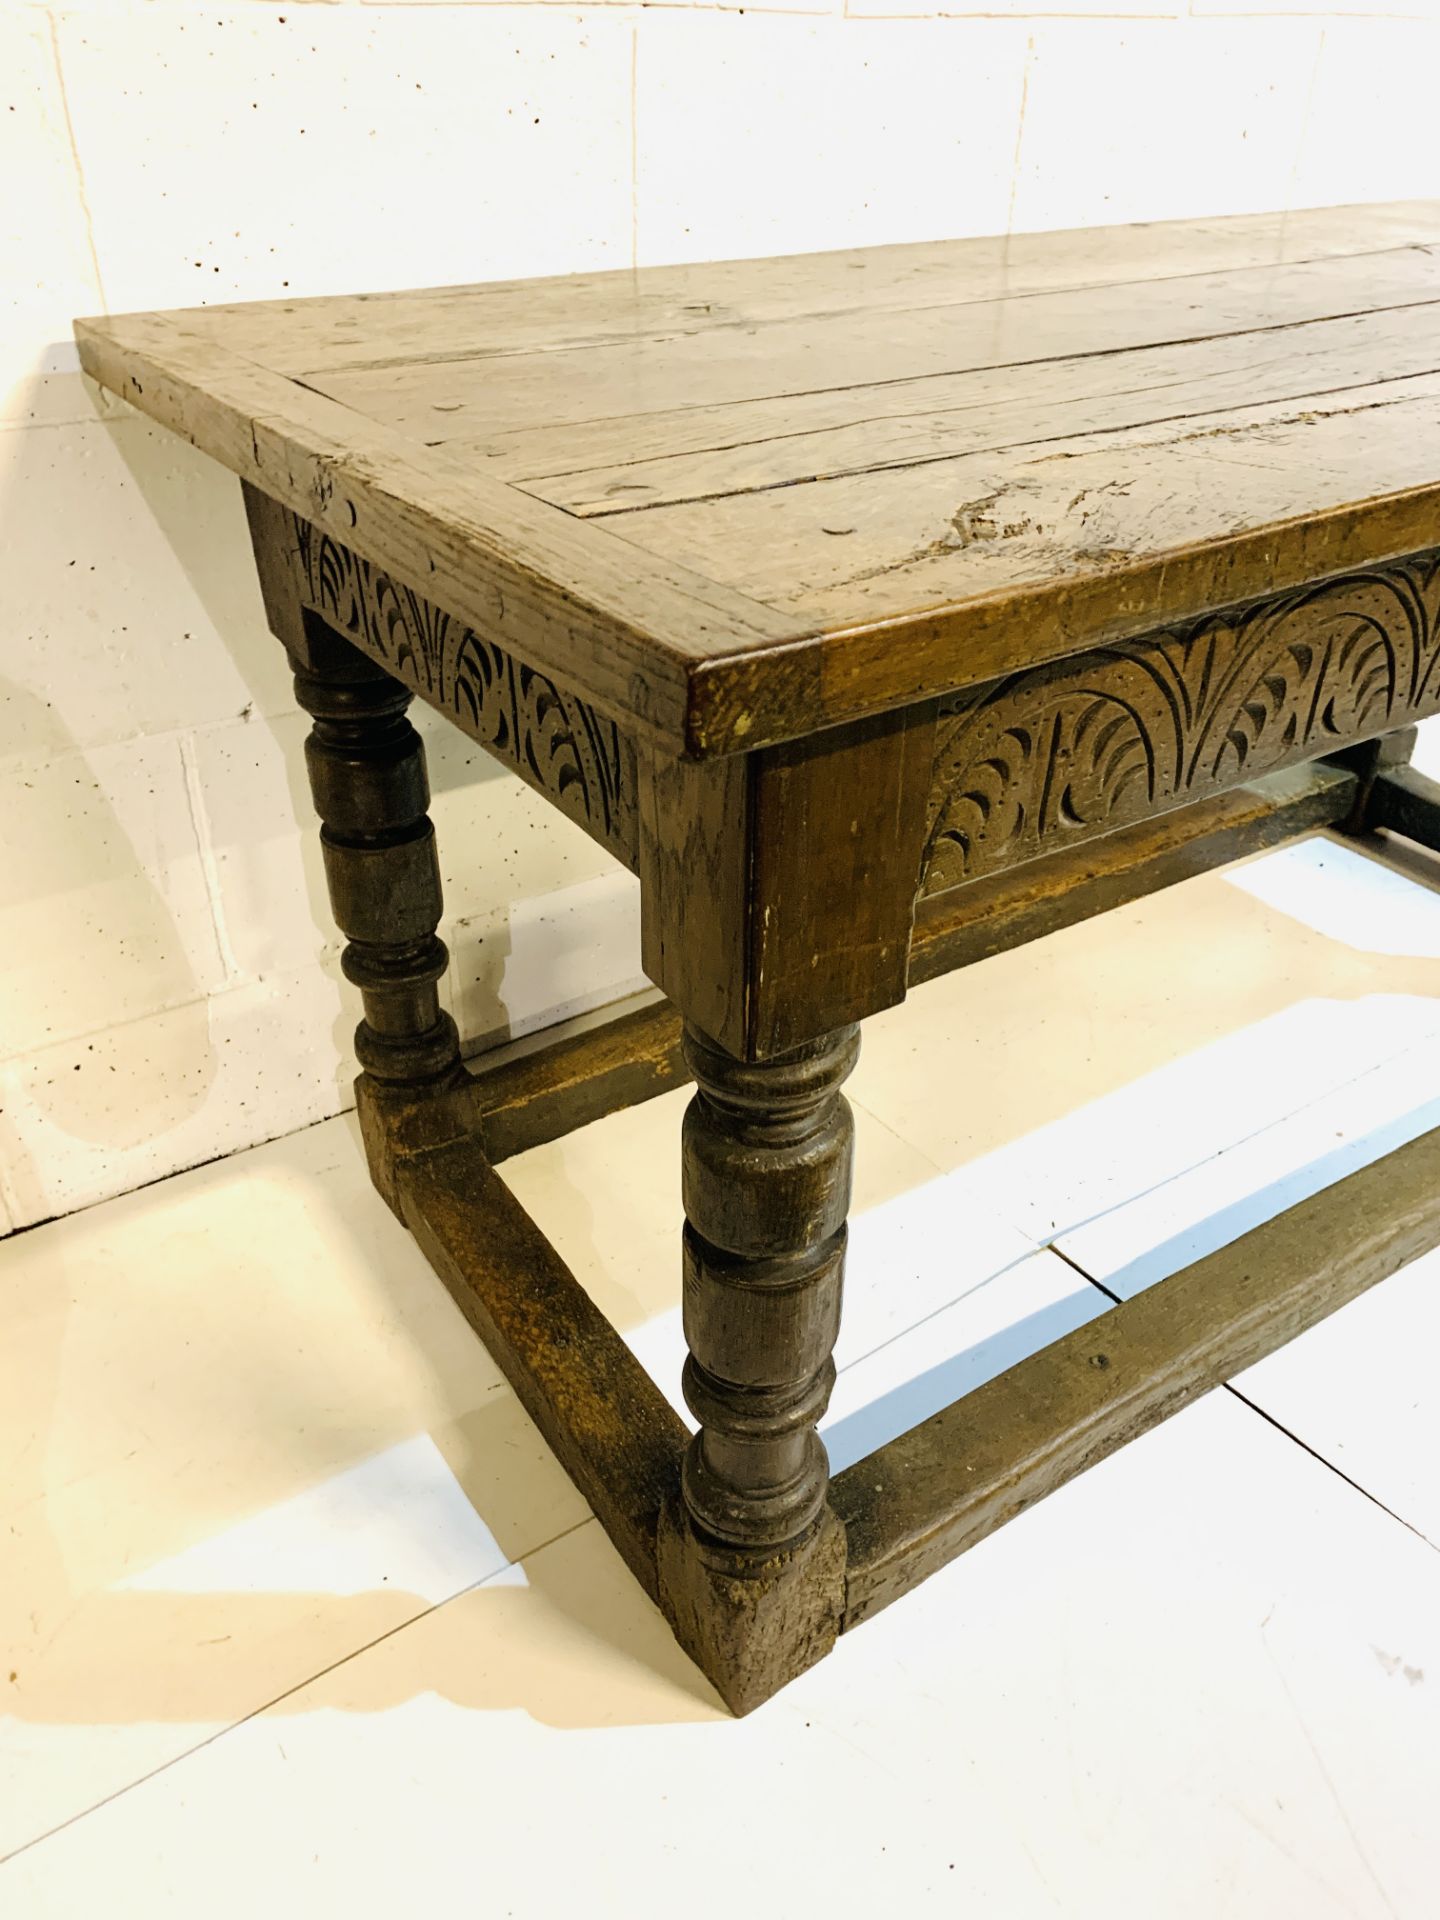 17th century oak refectory table - Image 8 of 8